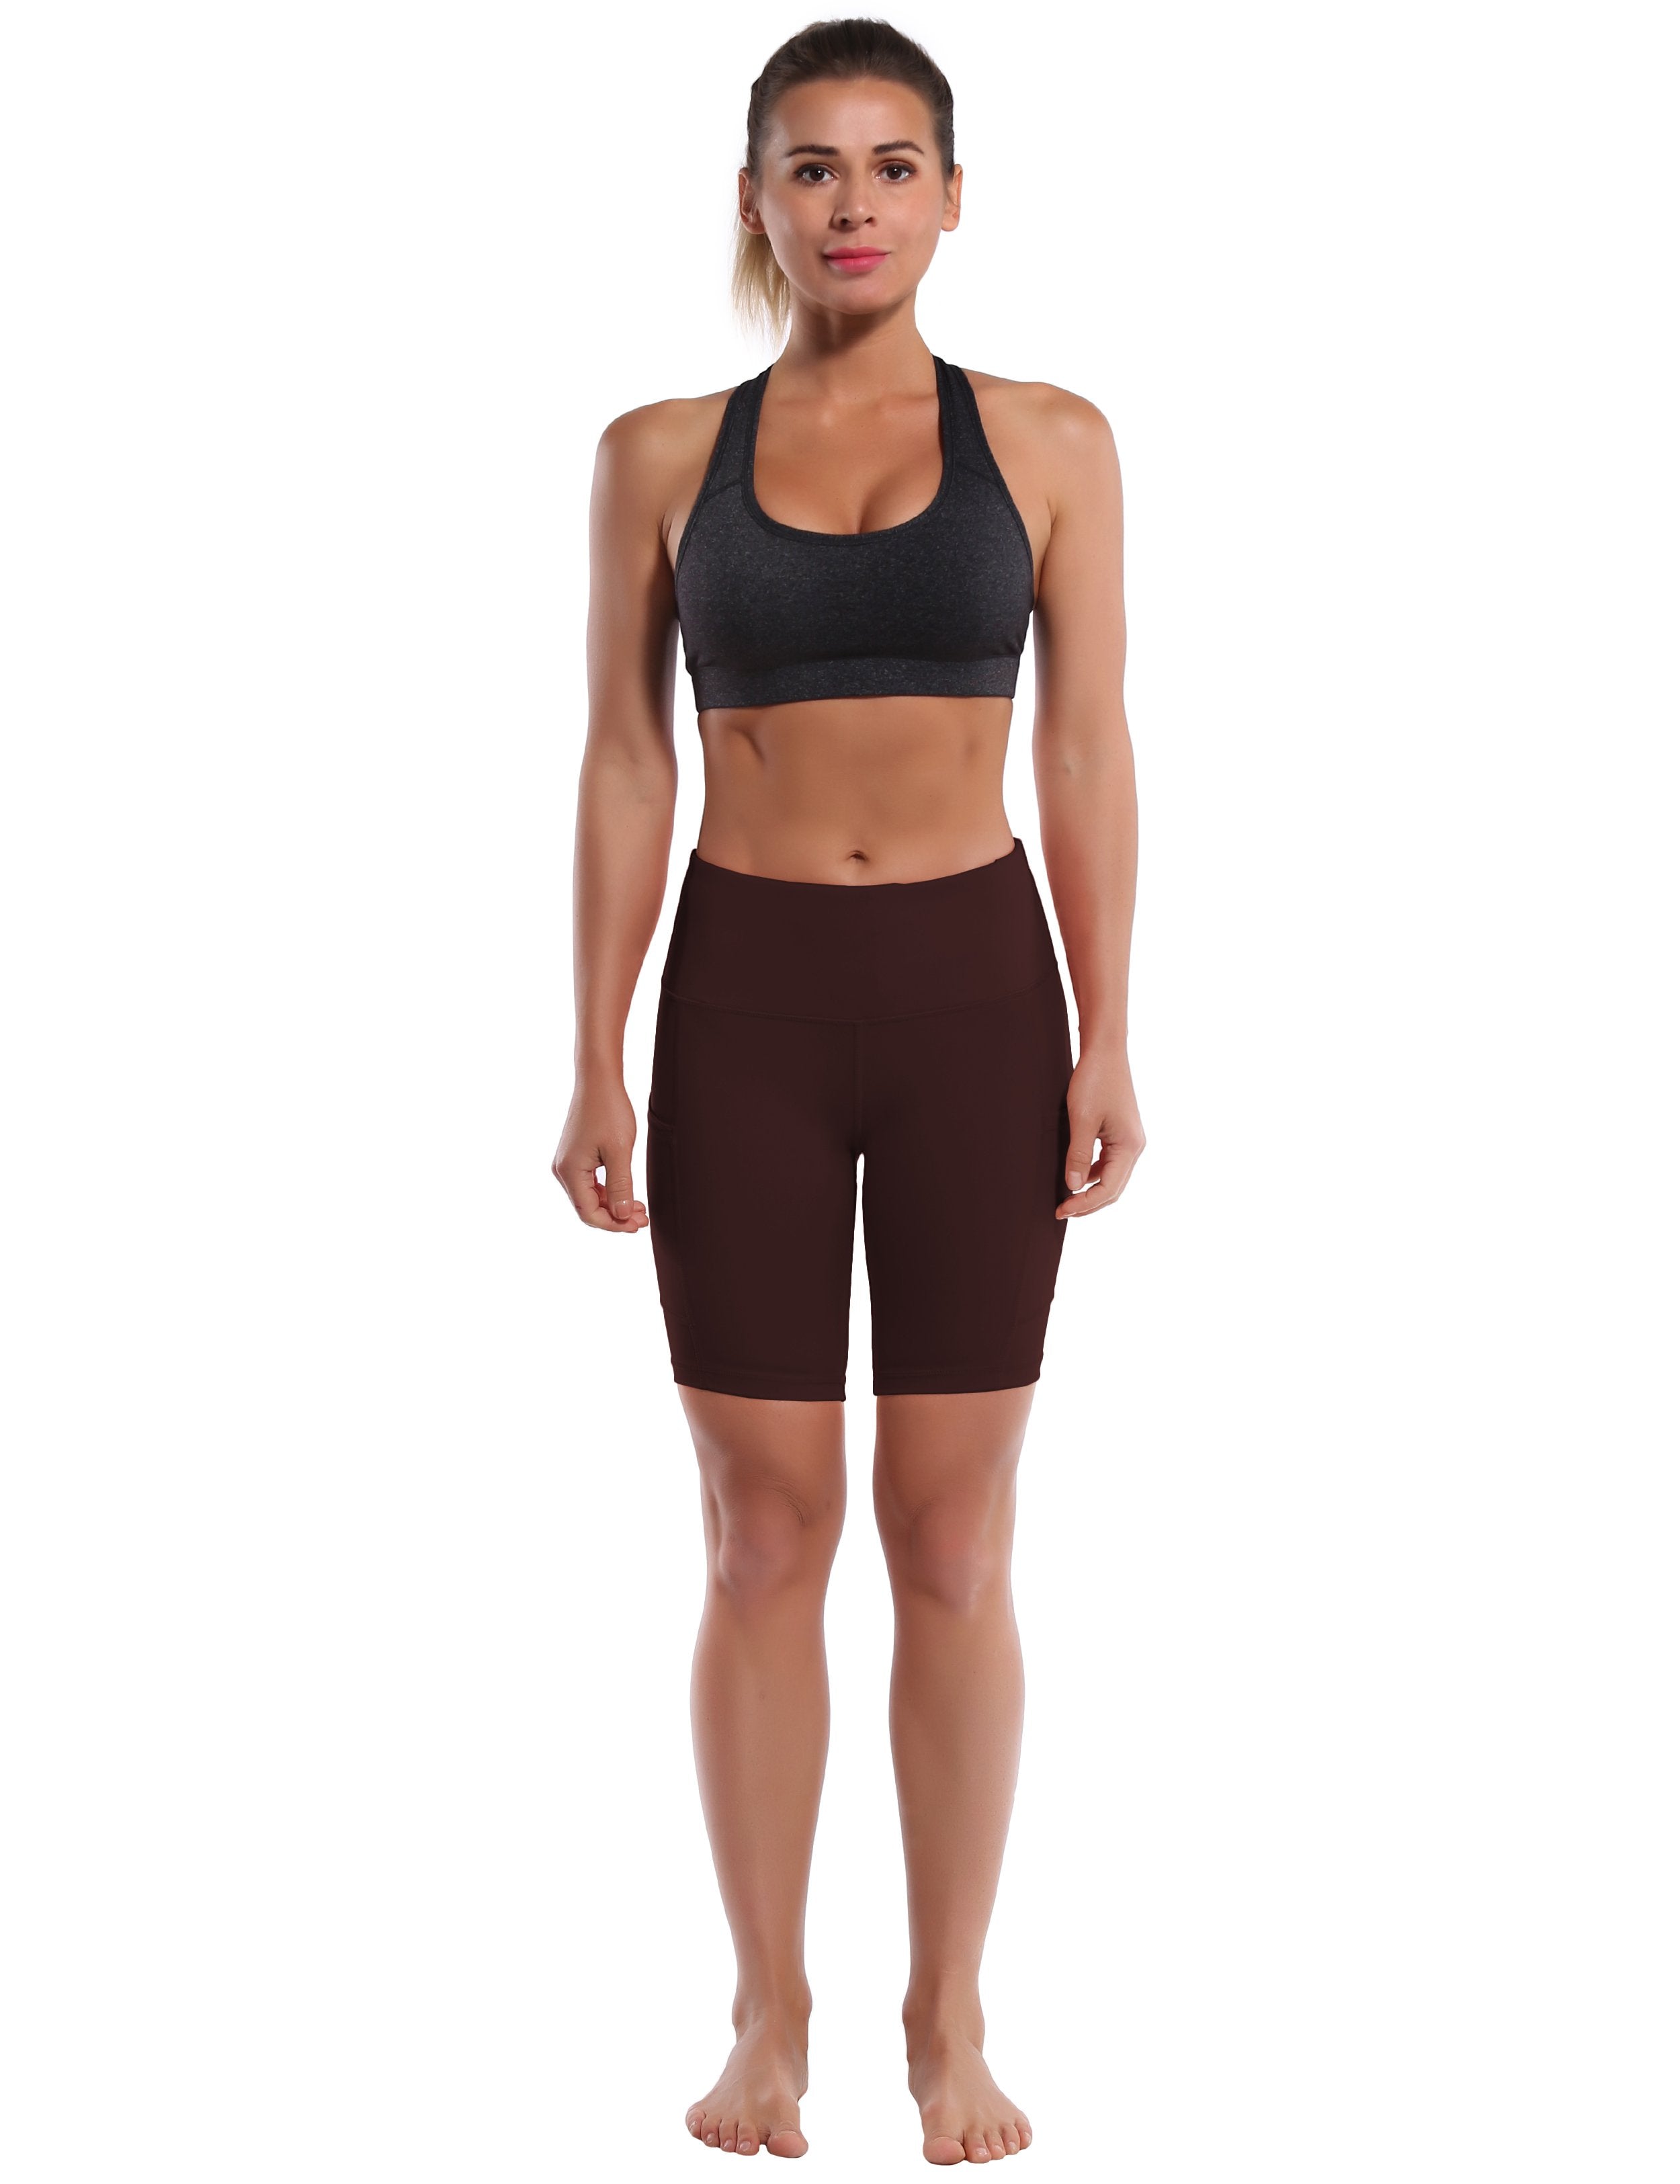 8" Side Pockets Pilates Shorts mahoganymaroon Sleek, soft, smooth and totally comfortable: our newest style is here. Softest-ever fabric High elasticity High density 4-way stretch Fabric doesn't attract lint easily No see-through Moisture-wicking Machine wash 75% Nylon, 25% Spandex